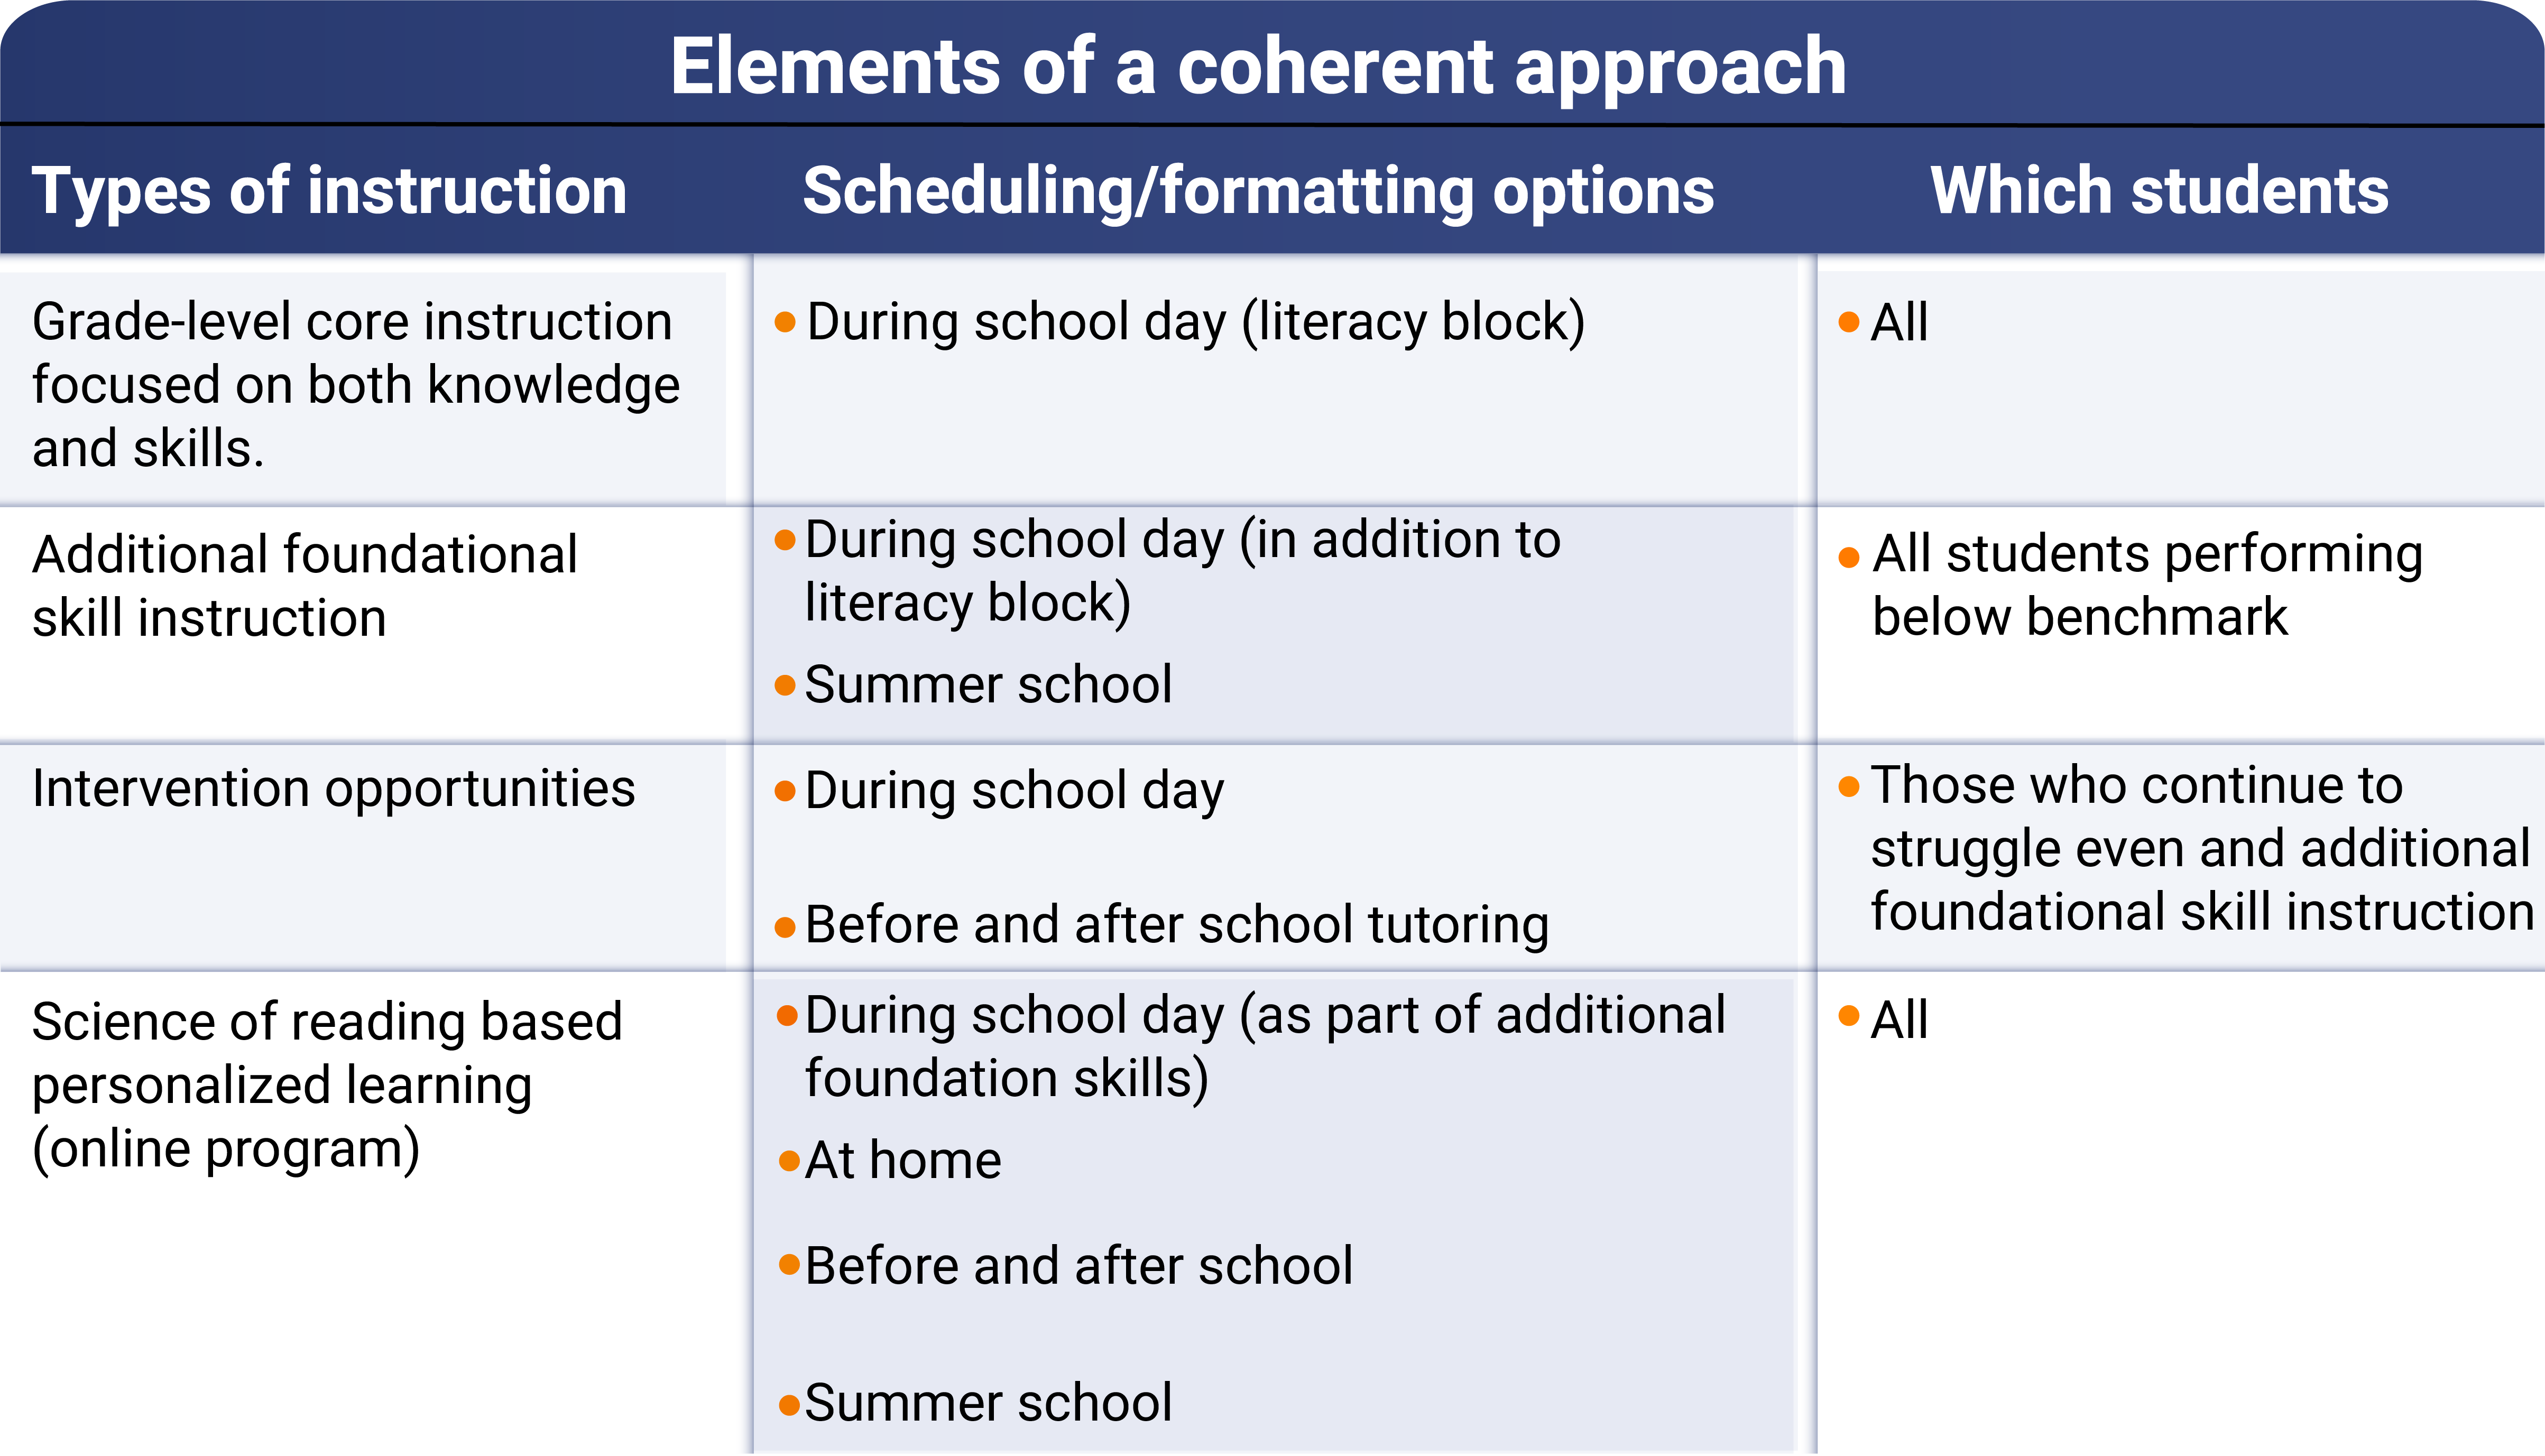 Elements of Coherent Approach